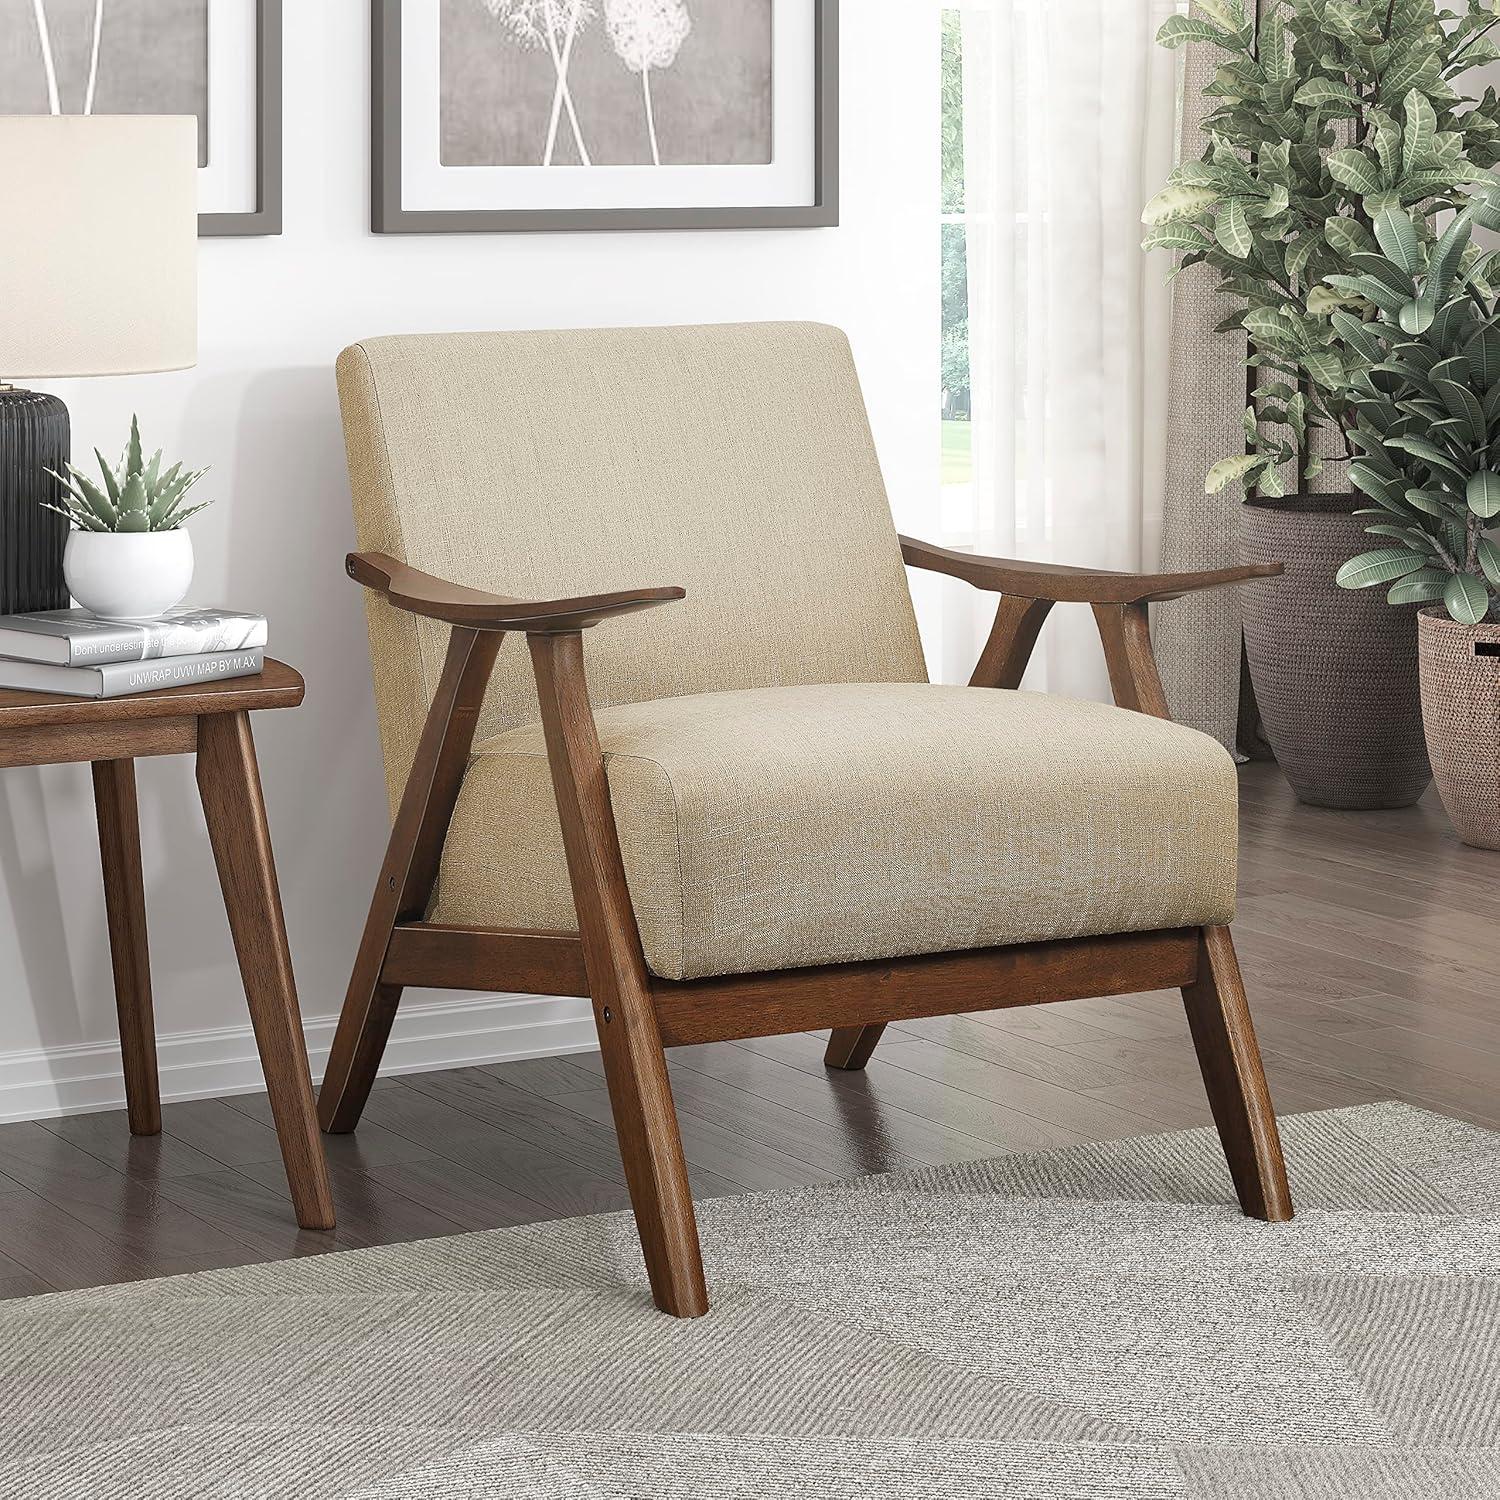 Lexicon Transitional Walnut Wood Accent Chair in Light Brown Fabric